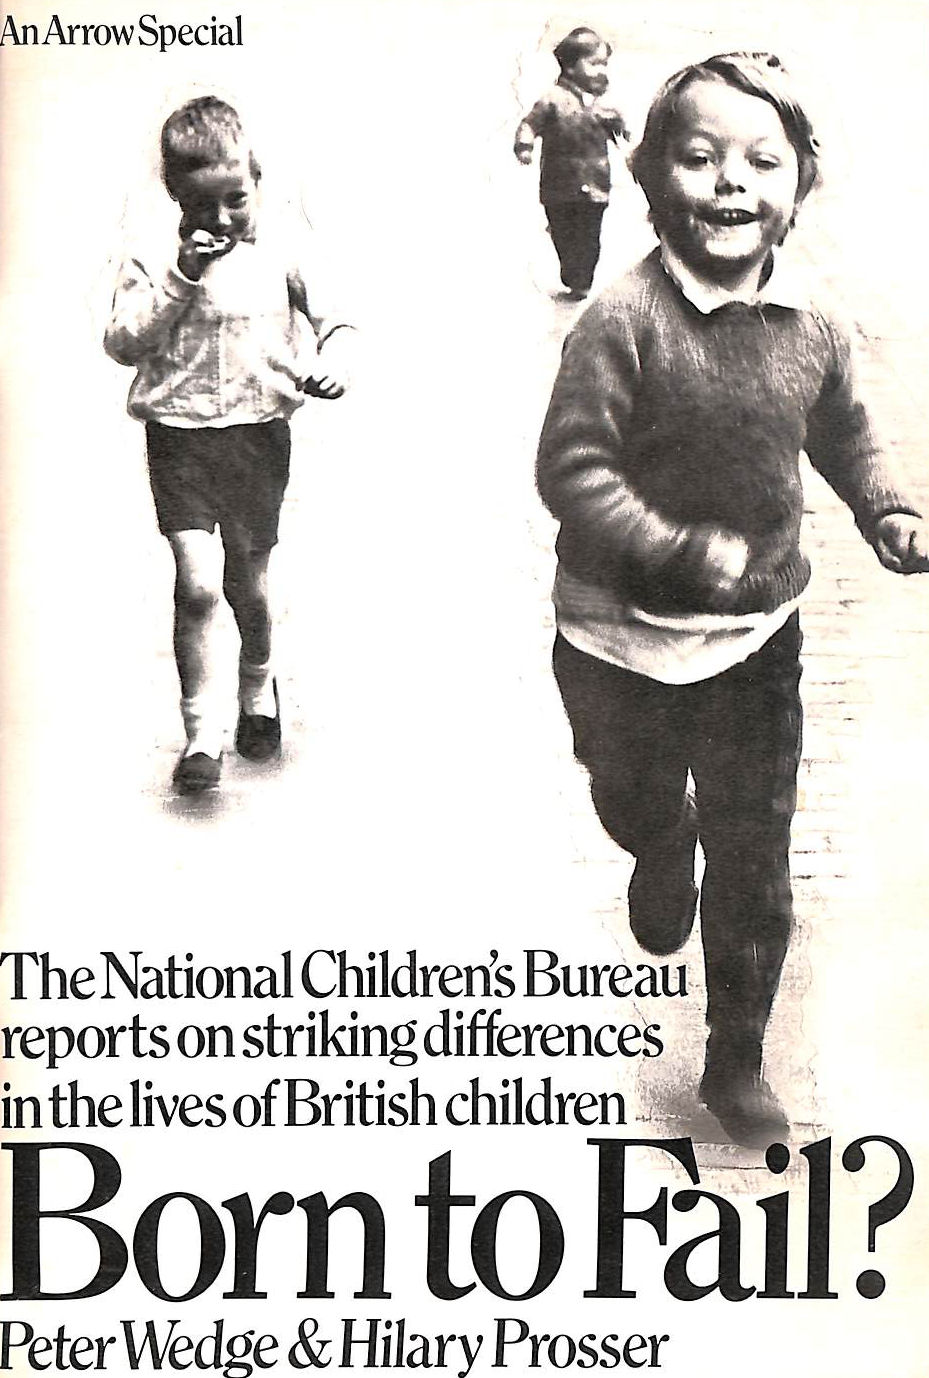 WEDGE, PETER & HILARY PROSSER. - Born to Fail? (The National Children's Bureau reports on striking differences in the lives of British children)